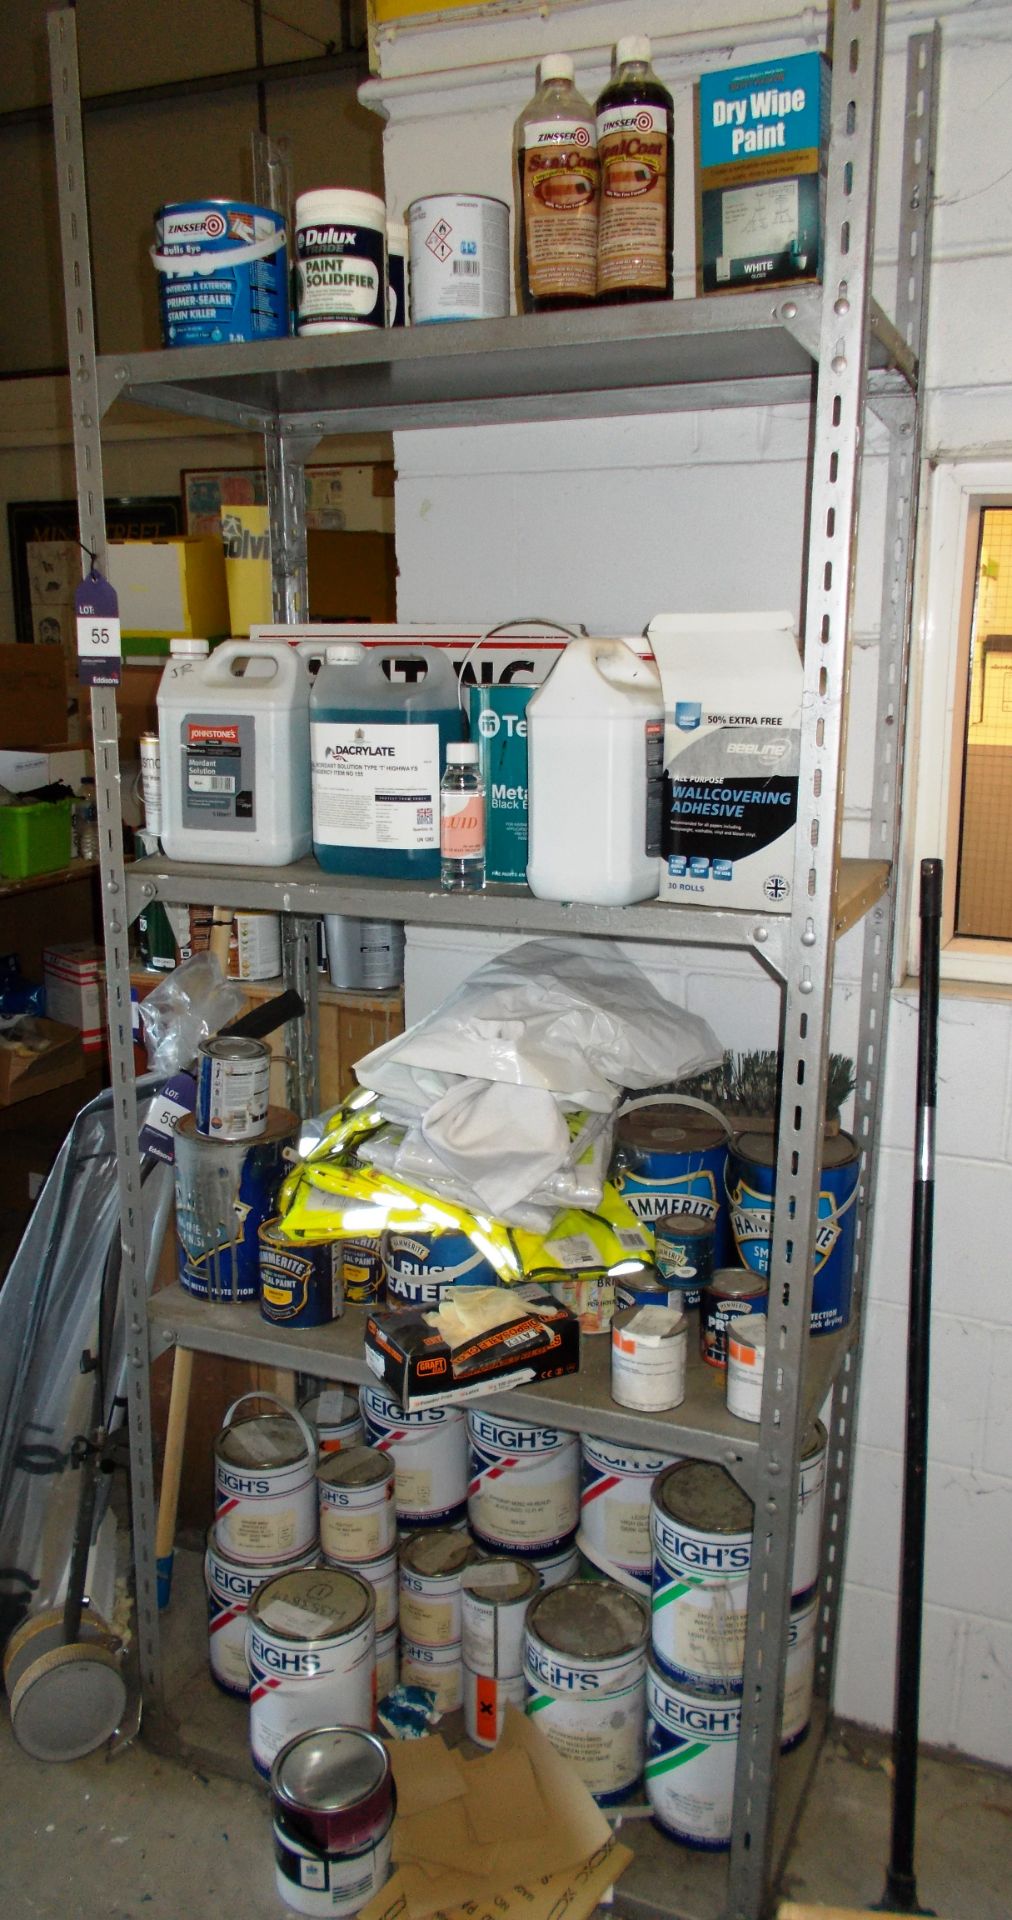 3 x bolted racks, and contents, including assortment of paints and lubricants (some of which are